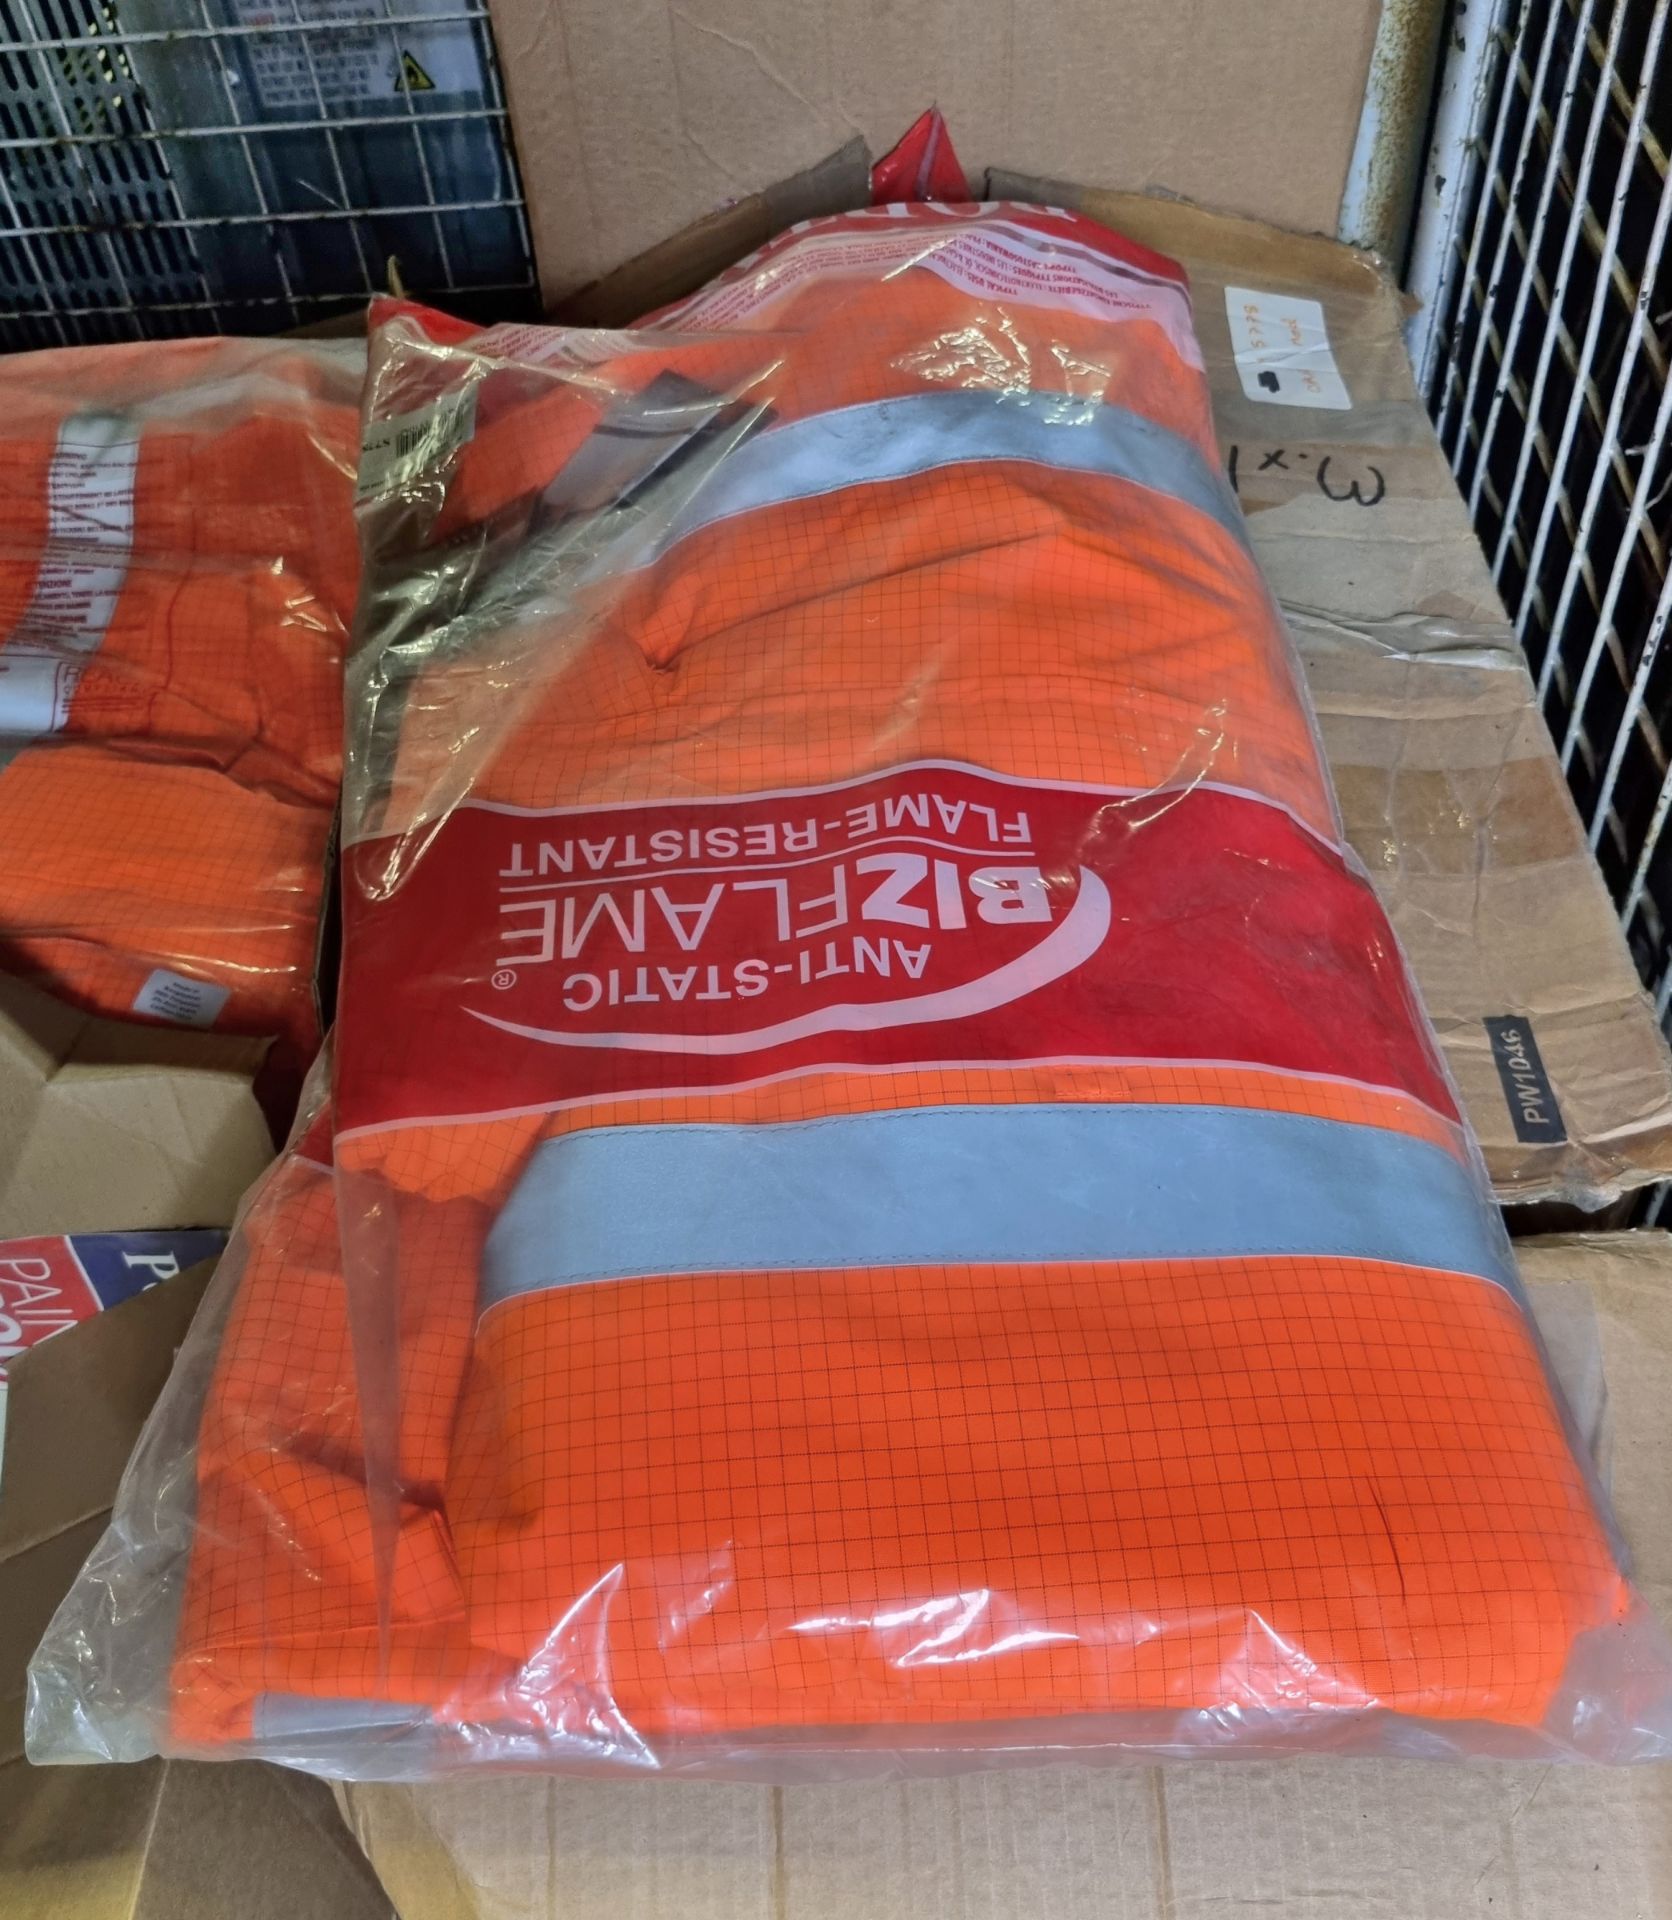 Workwear - Hi-VIs jumpers and flamesafe coats - assorted sizes medium to large - Image 4 of 8